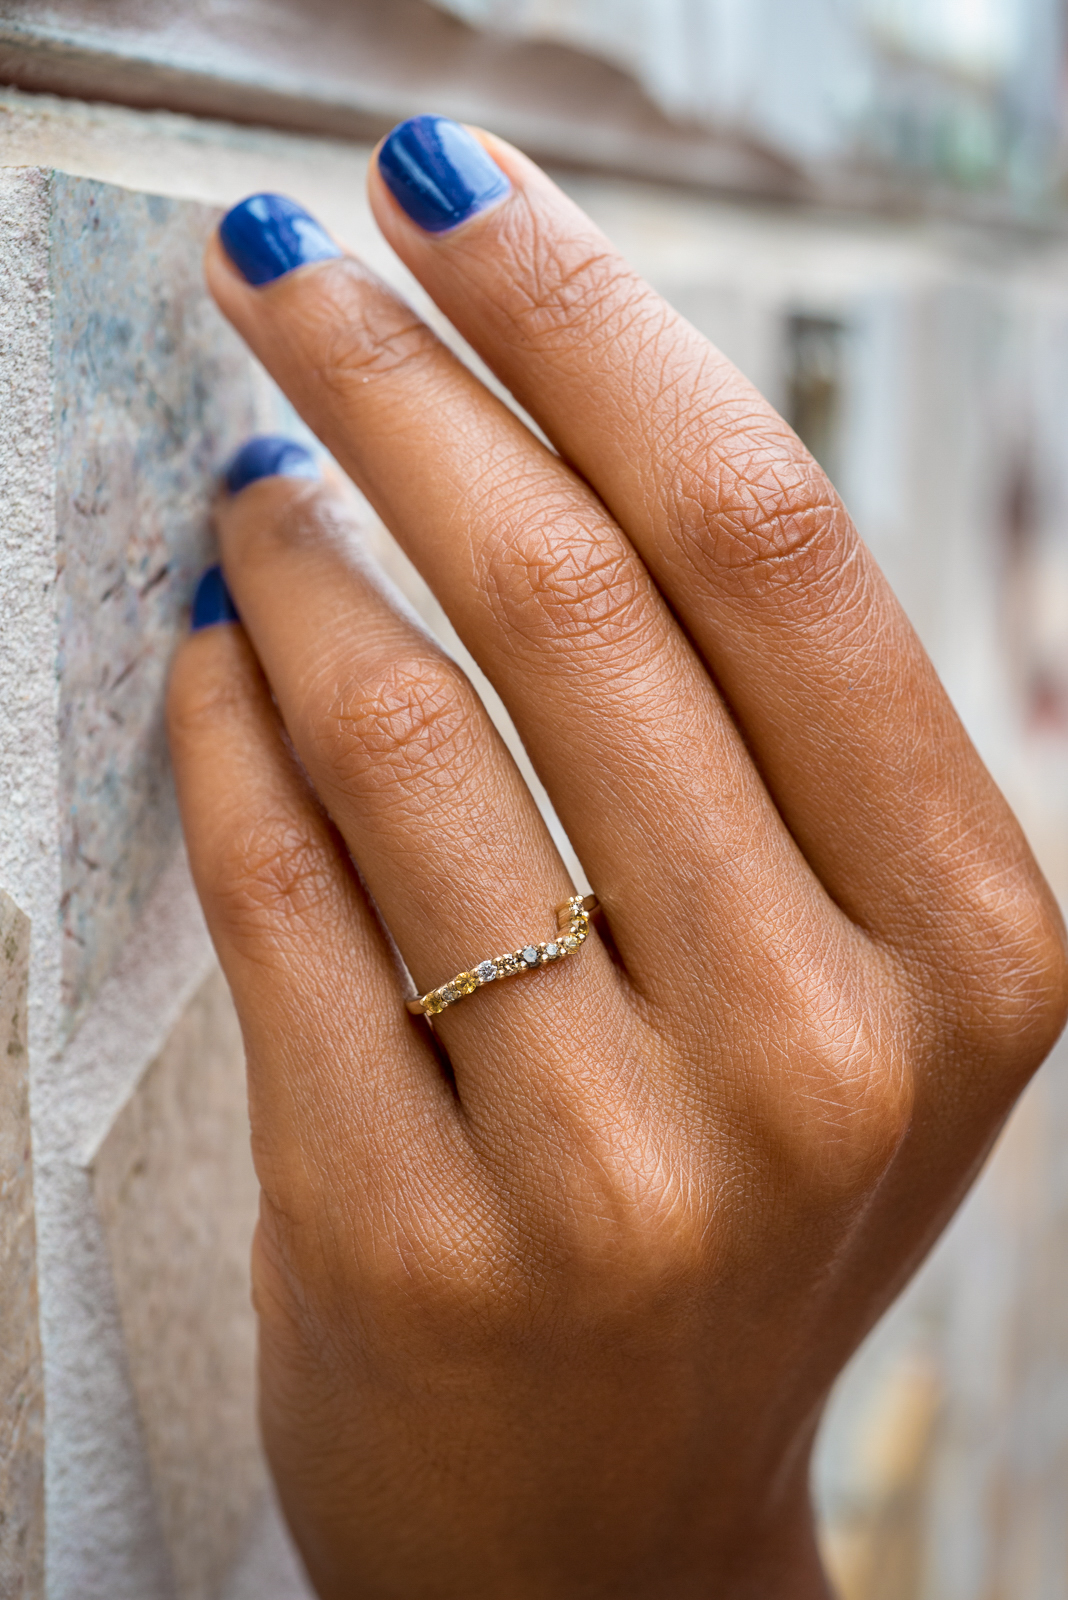 First-Time Ring-Wearer's Guide to Wedding Bands - Bario Neal